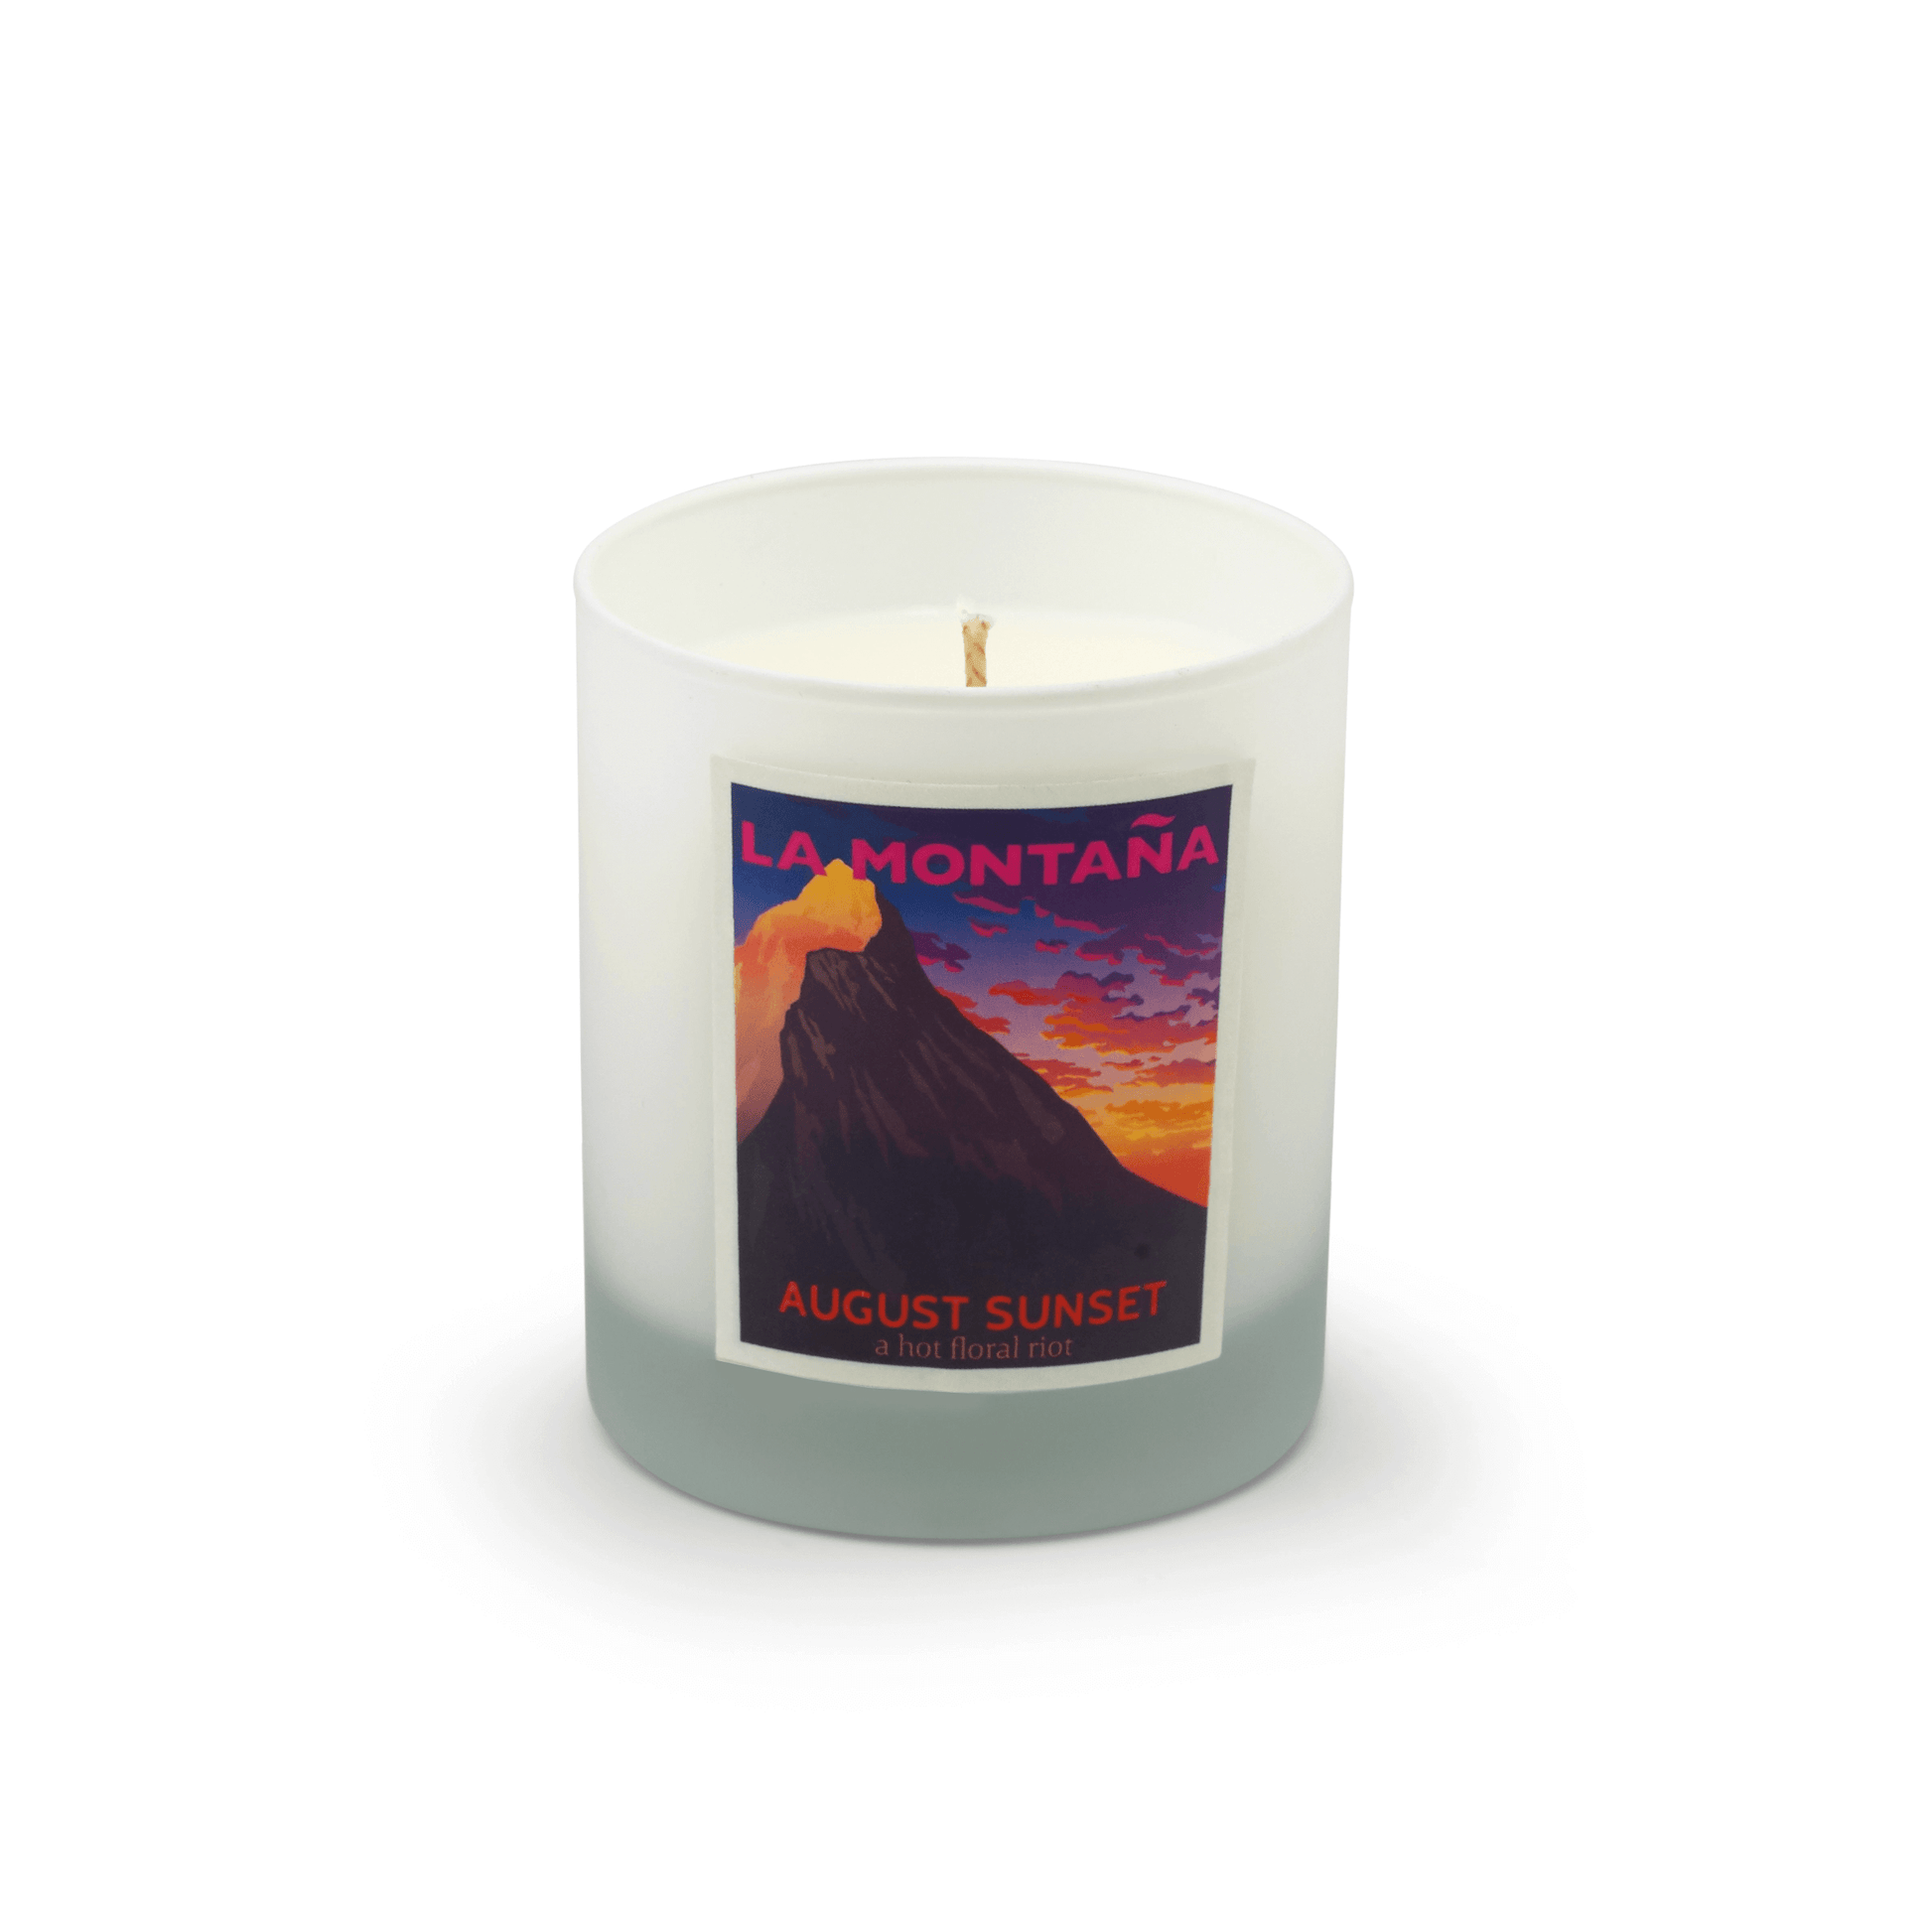 La Montaña August Sunset Scented Candle - Osmology Scented Candles & Home Fragrance